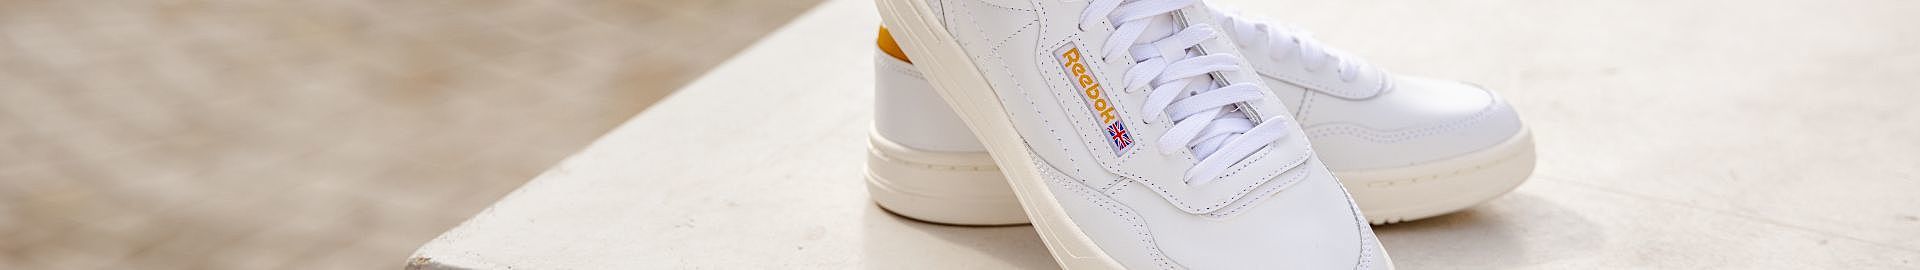 Chaussures Reebok pour hommes